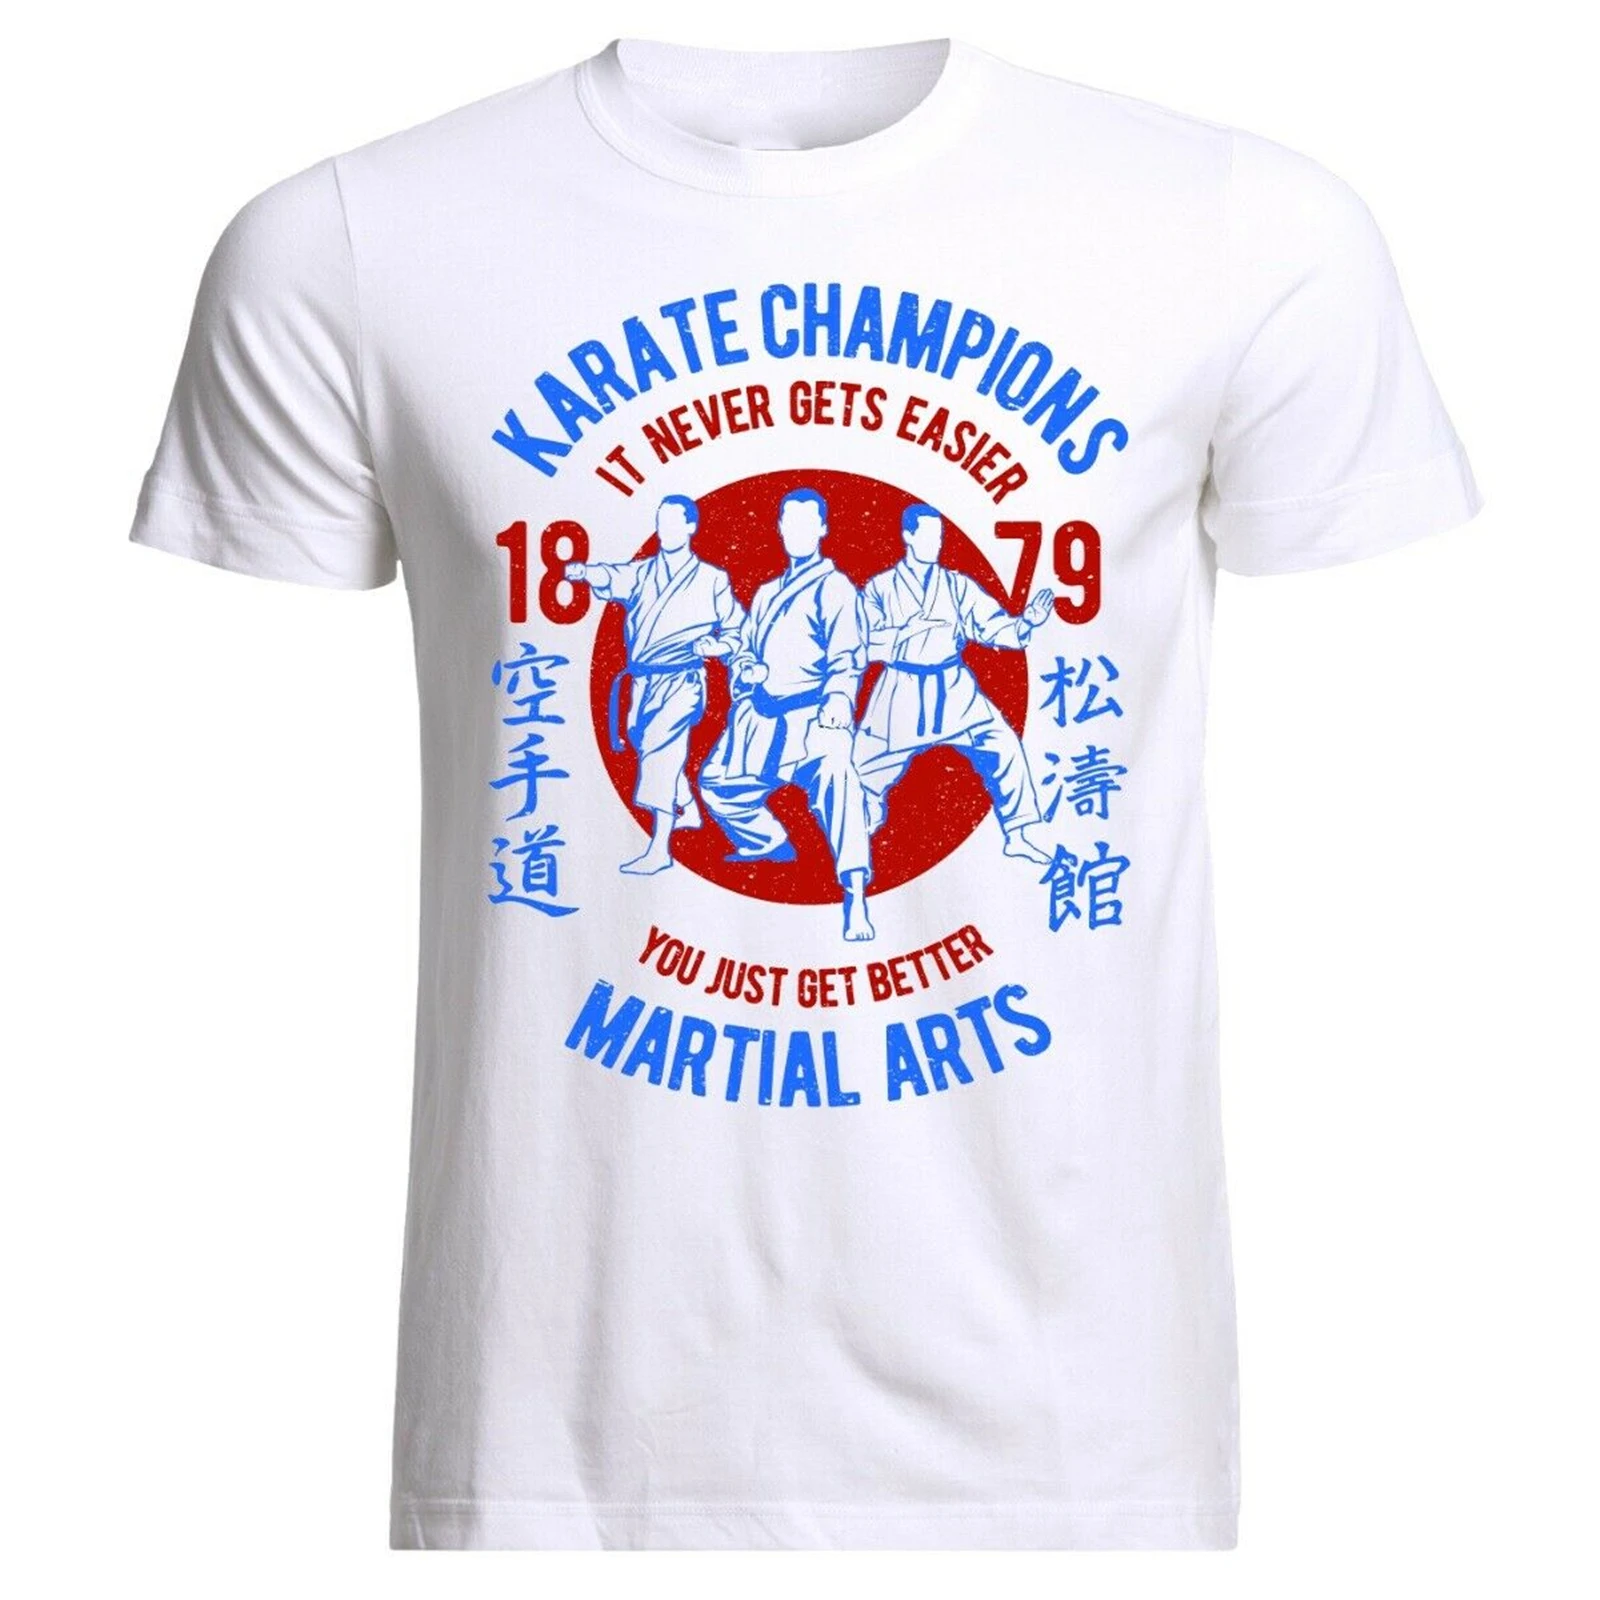 It Never Gets Easter Karate Champions Martial Arts MMA UFC T-Shirt Men's 100% Cotton Casual T-shirts Loose Top New